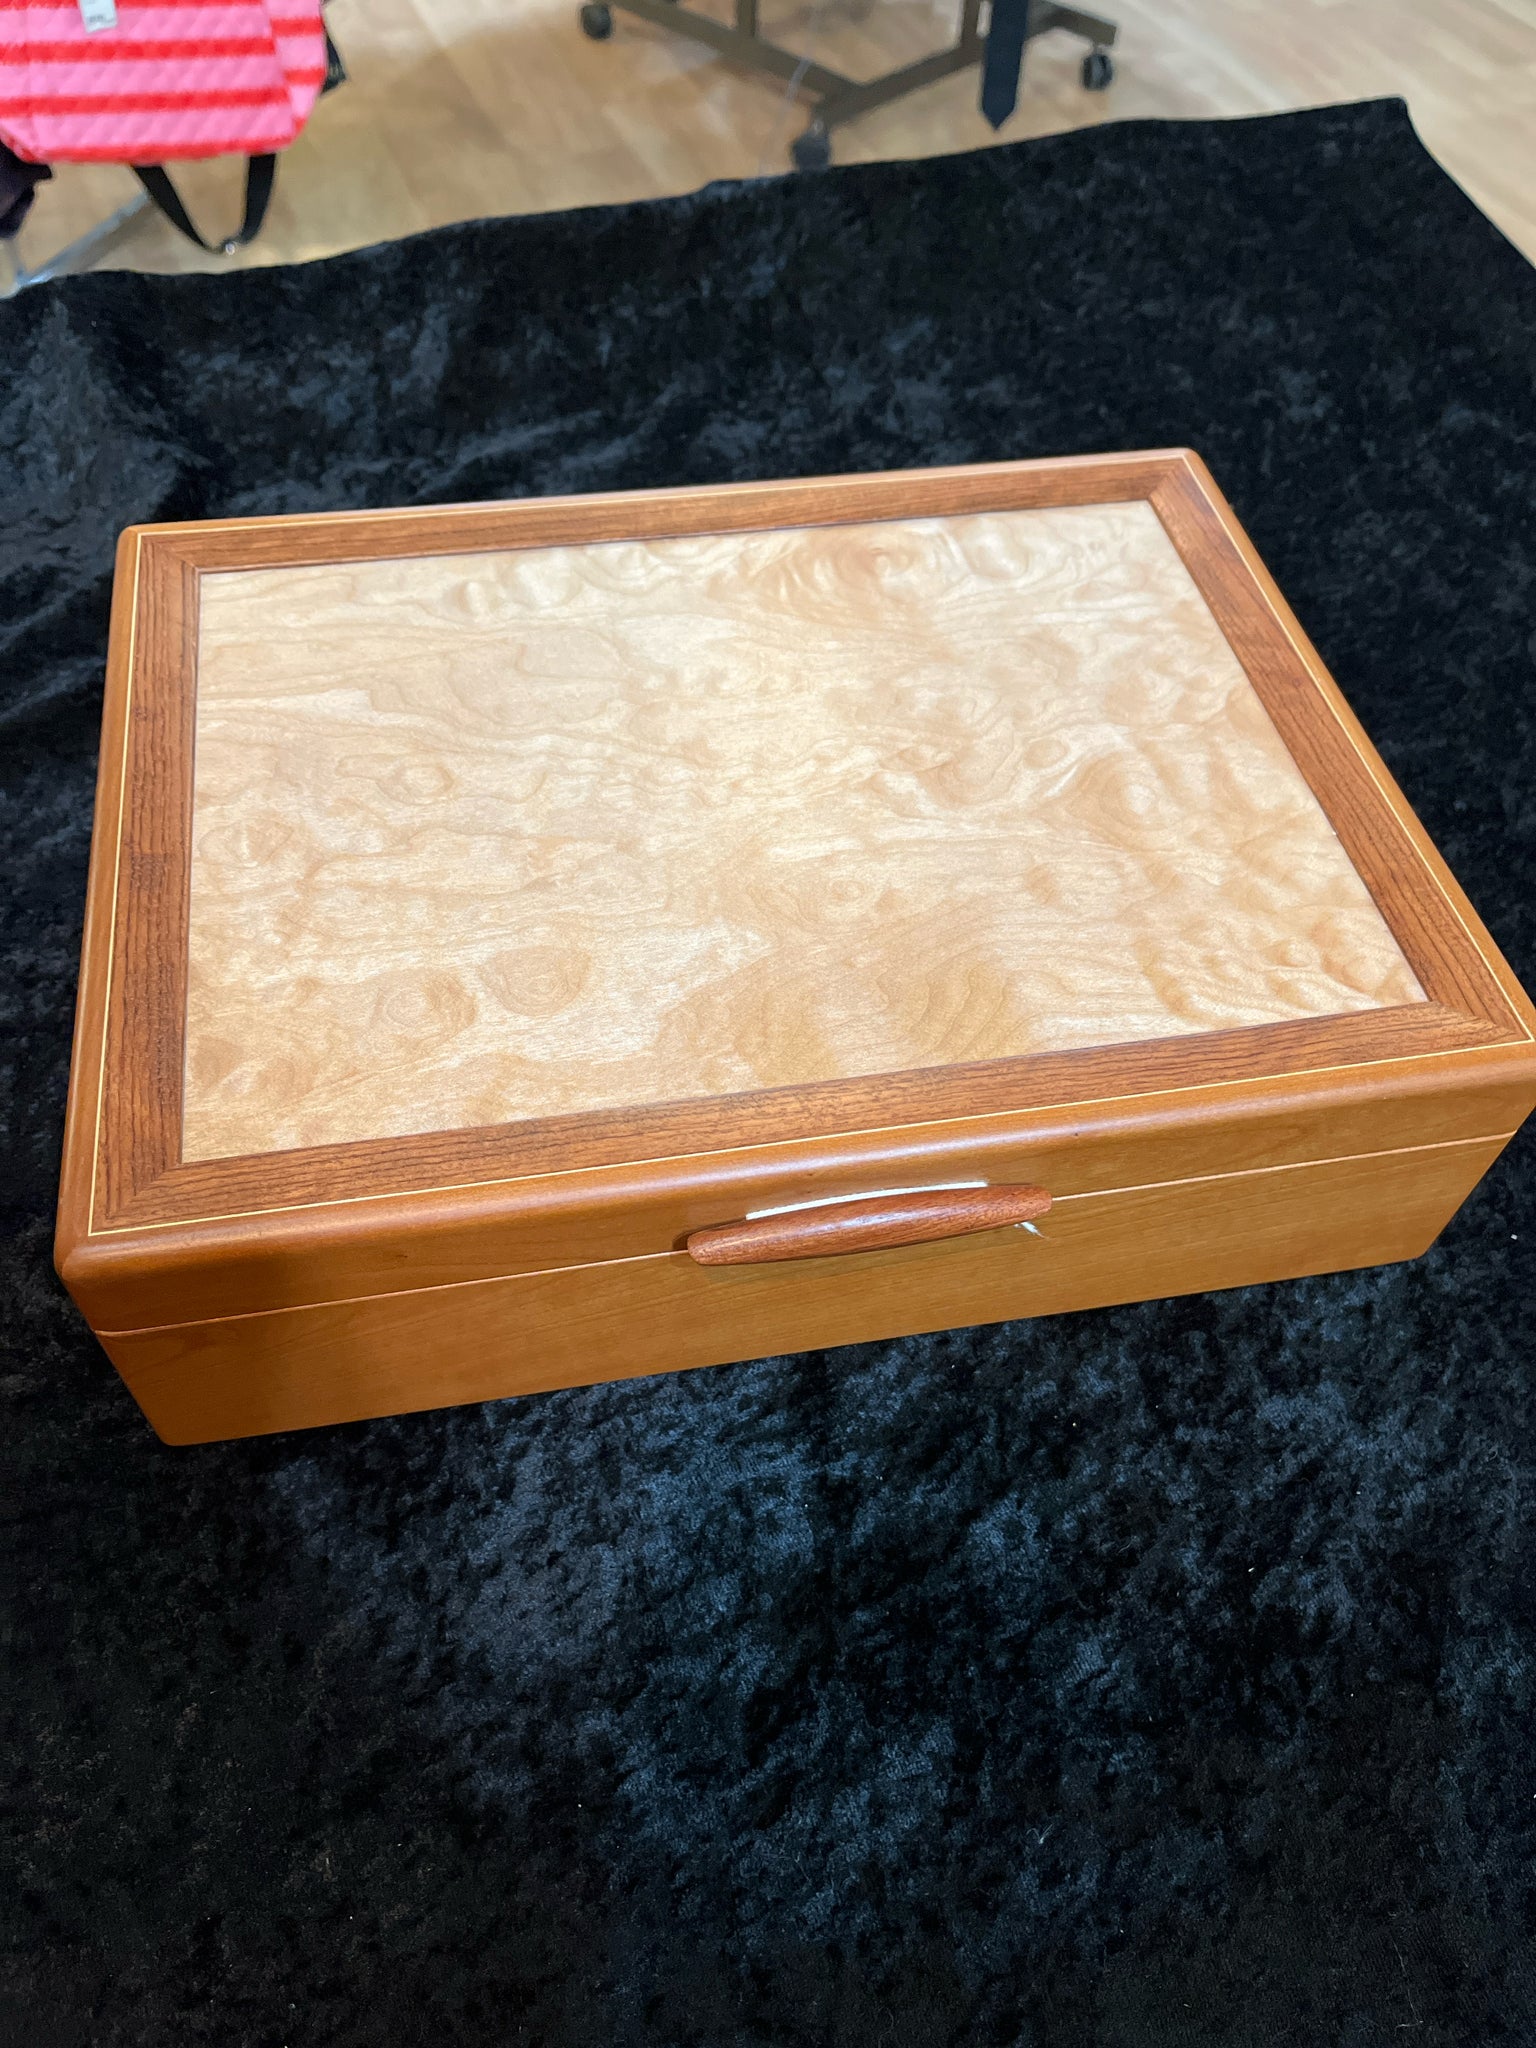 Mike Fisher "Cascade Collection" Jewelry Box